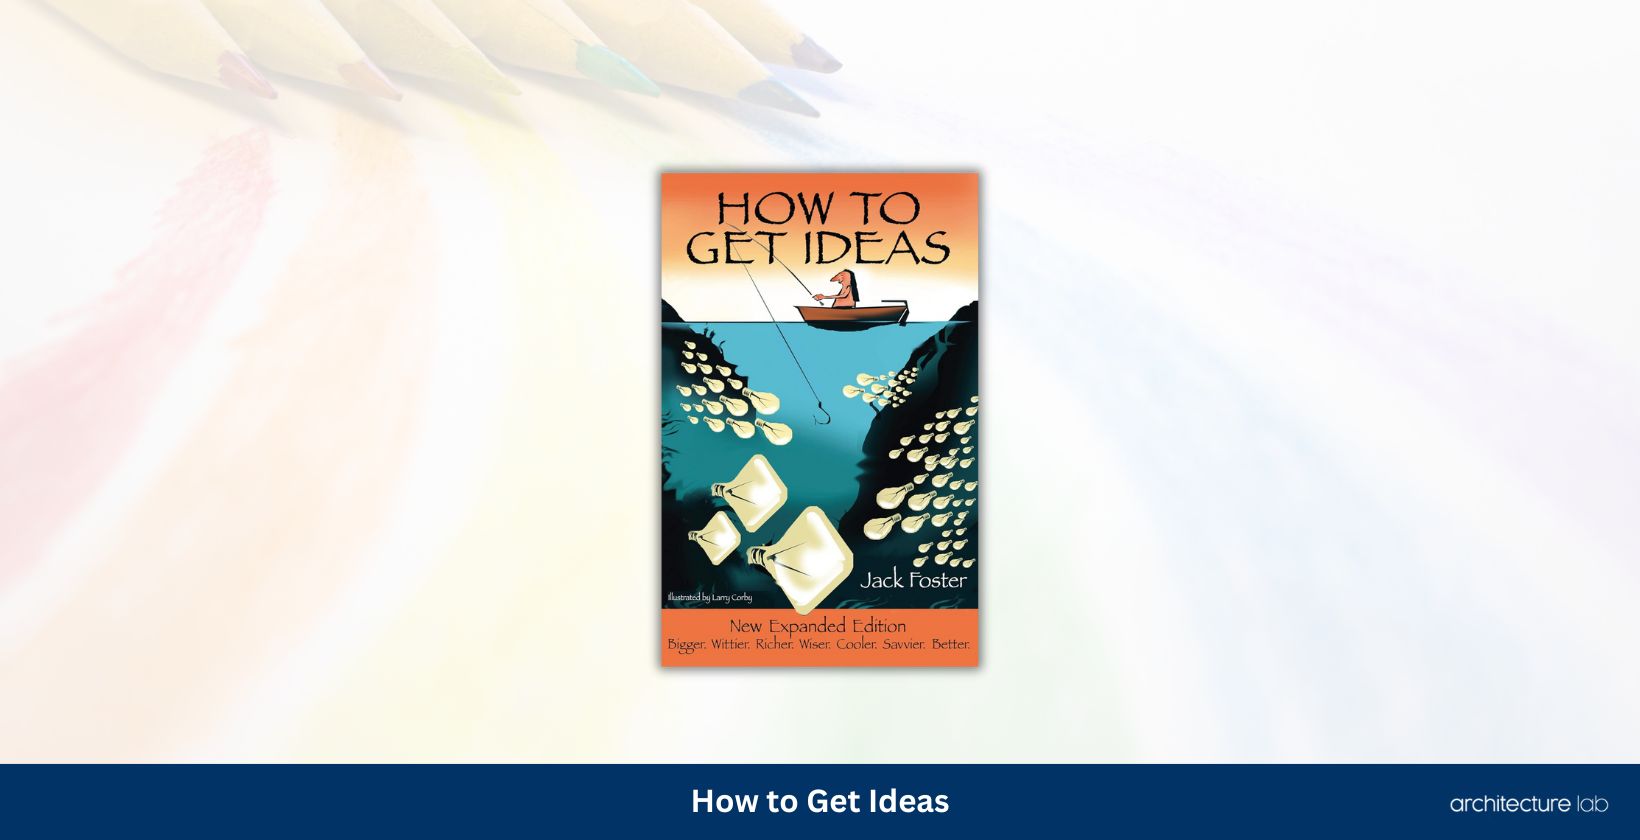 How to get ideas